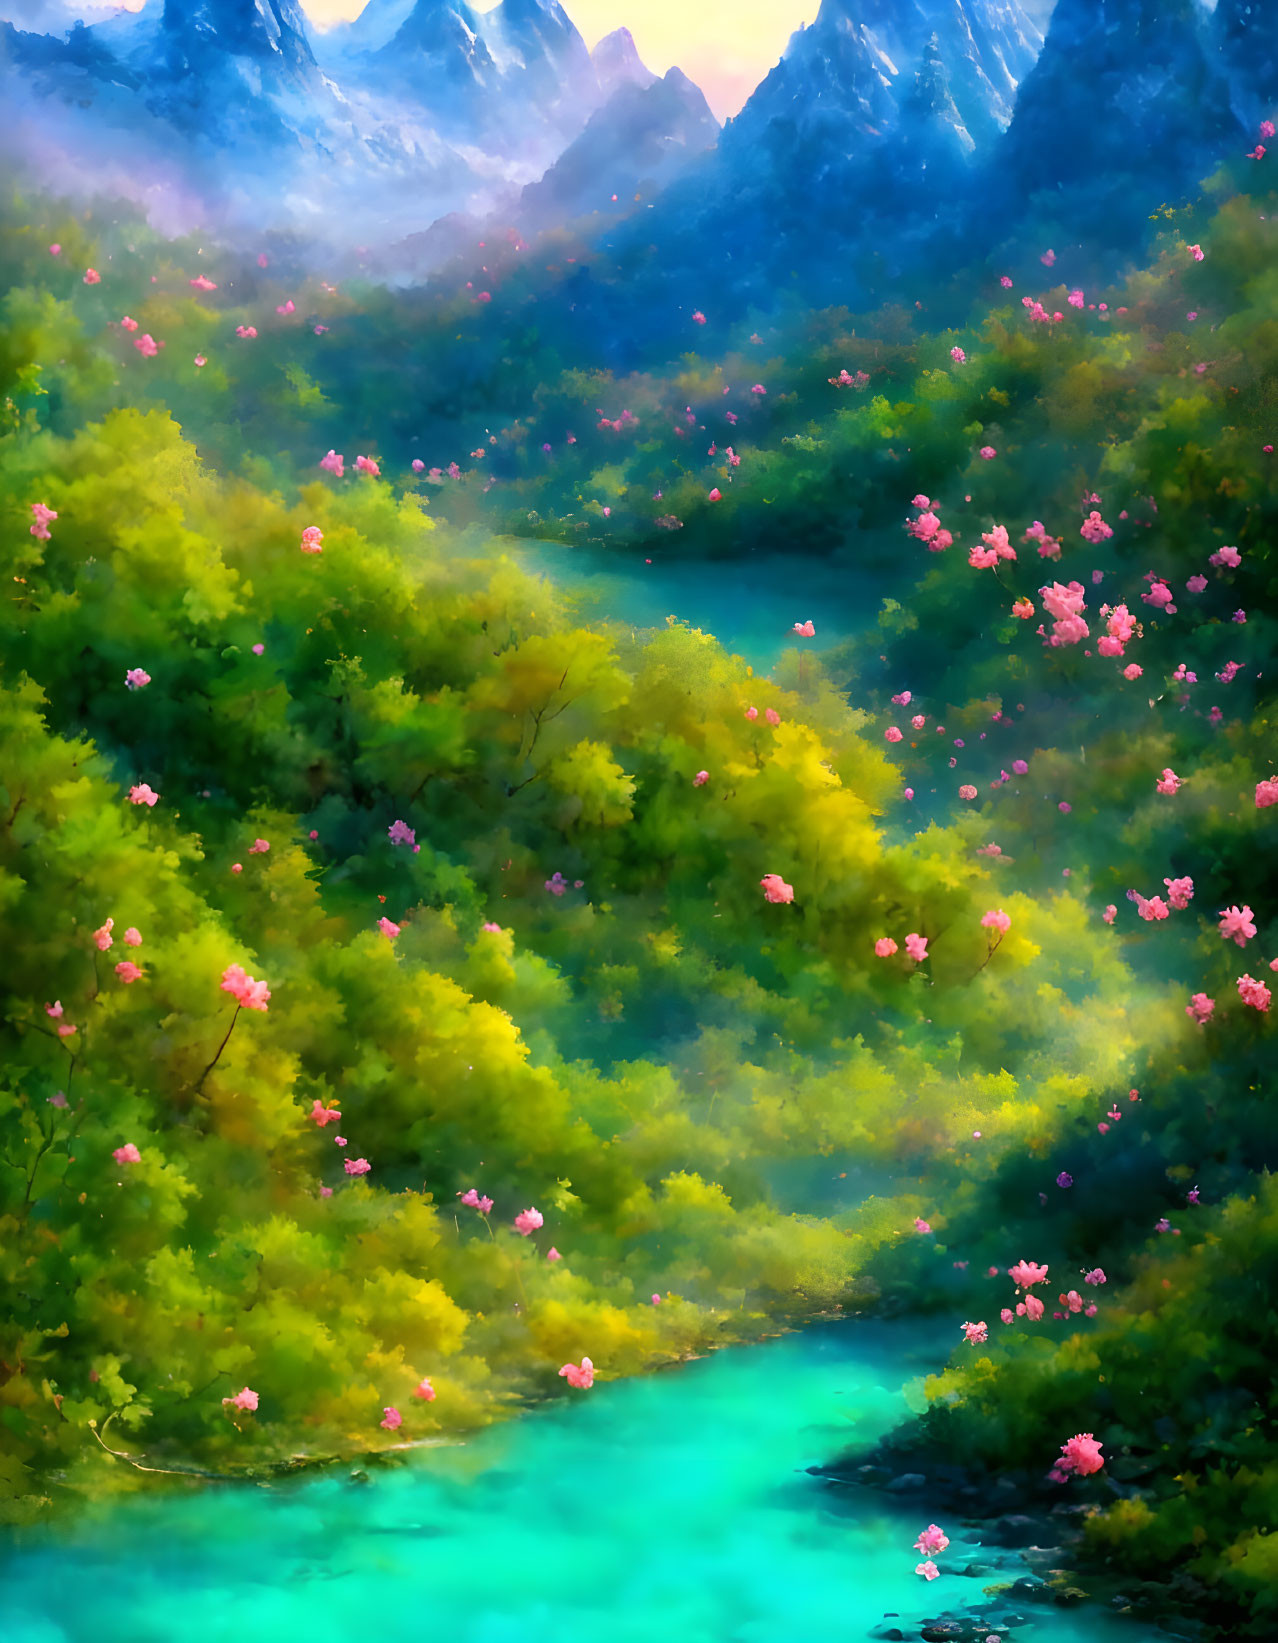 Colorful landscape with greenery, pink flowers, blue stream, and misty mountains